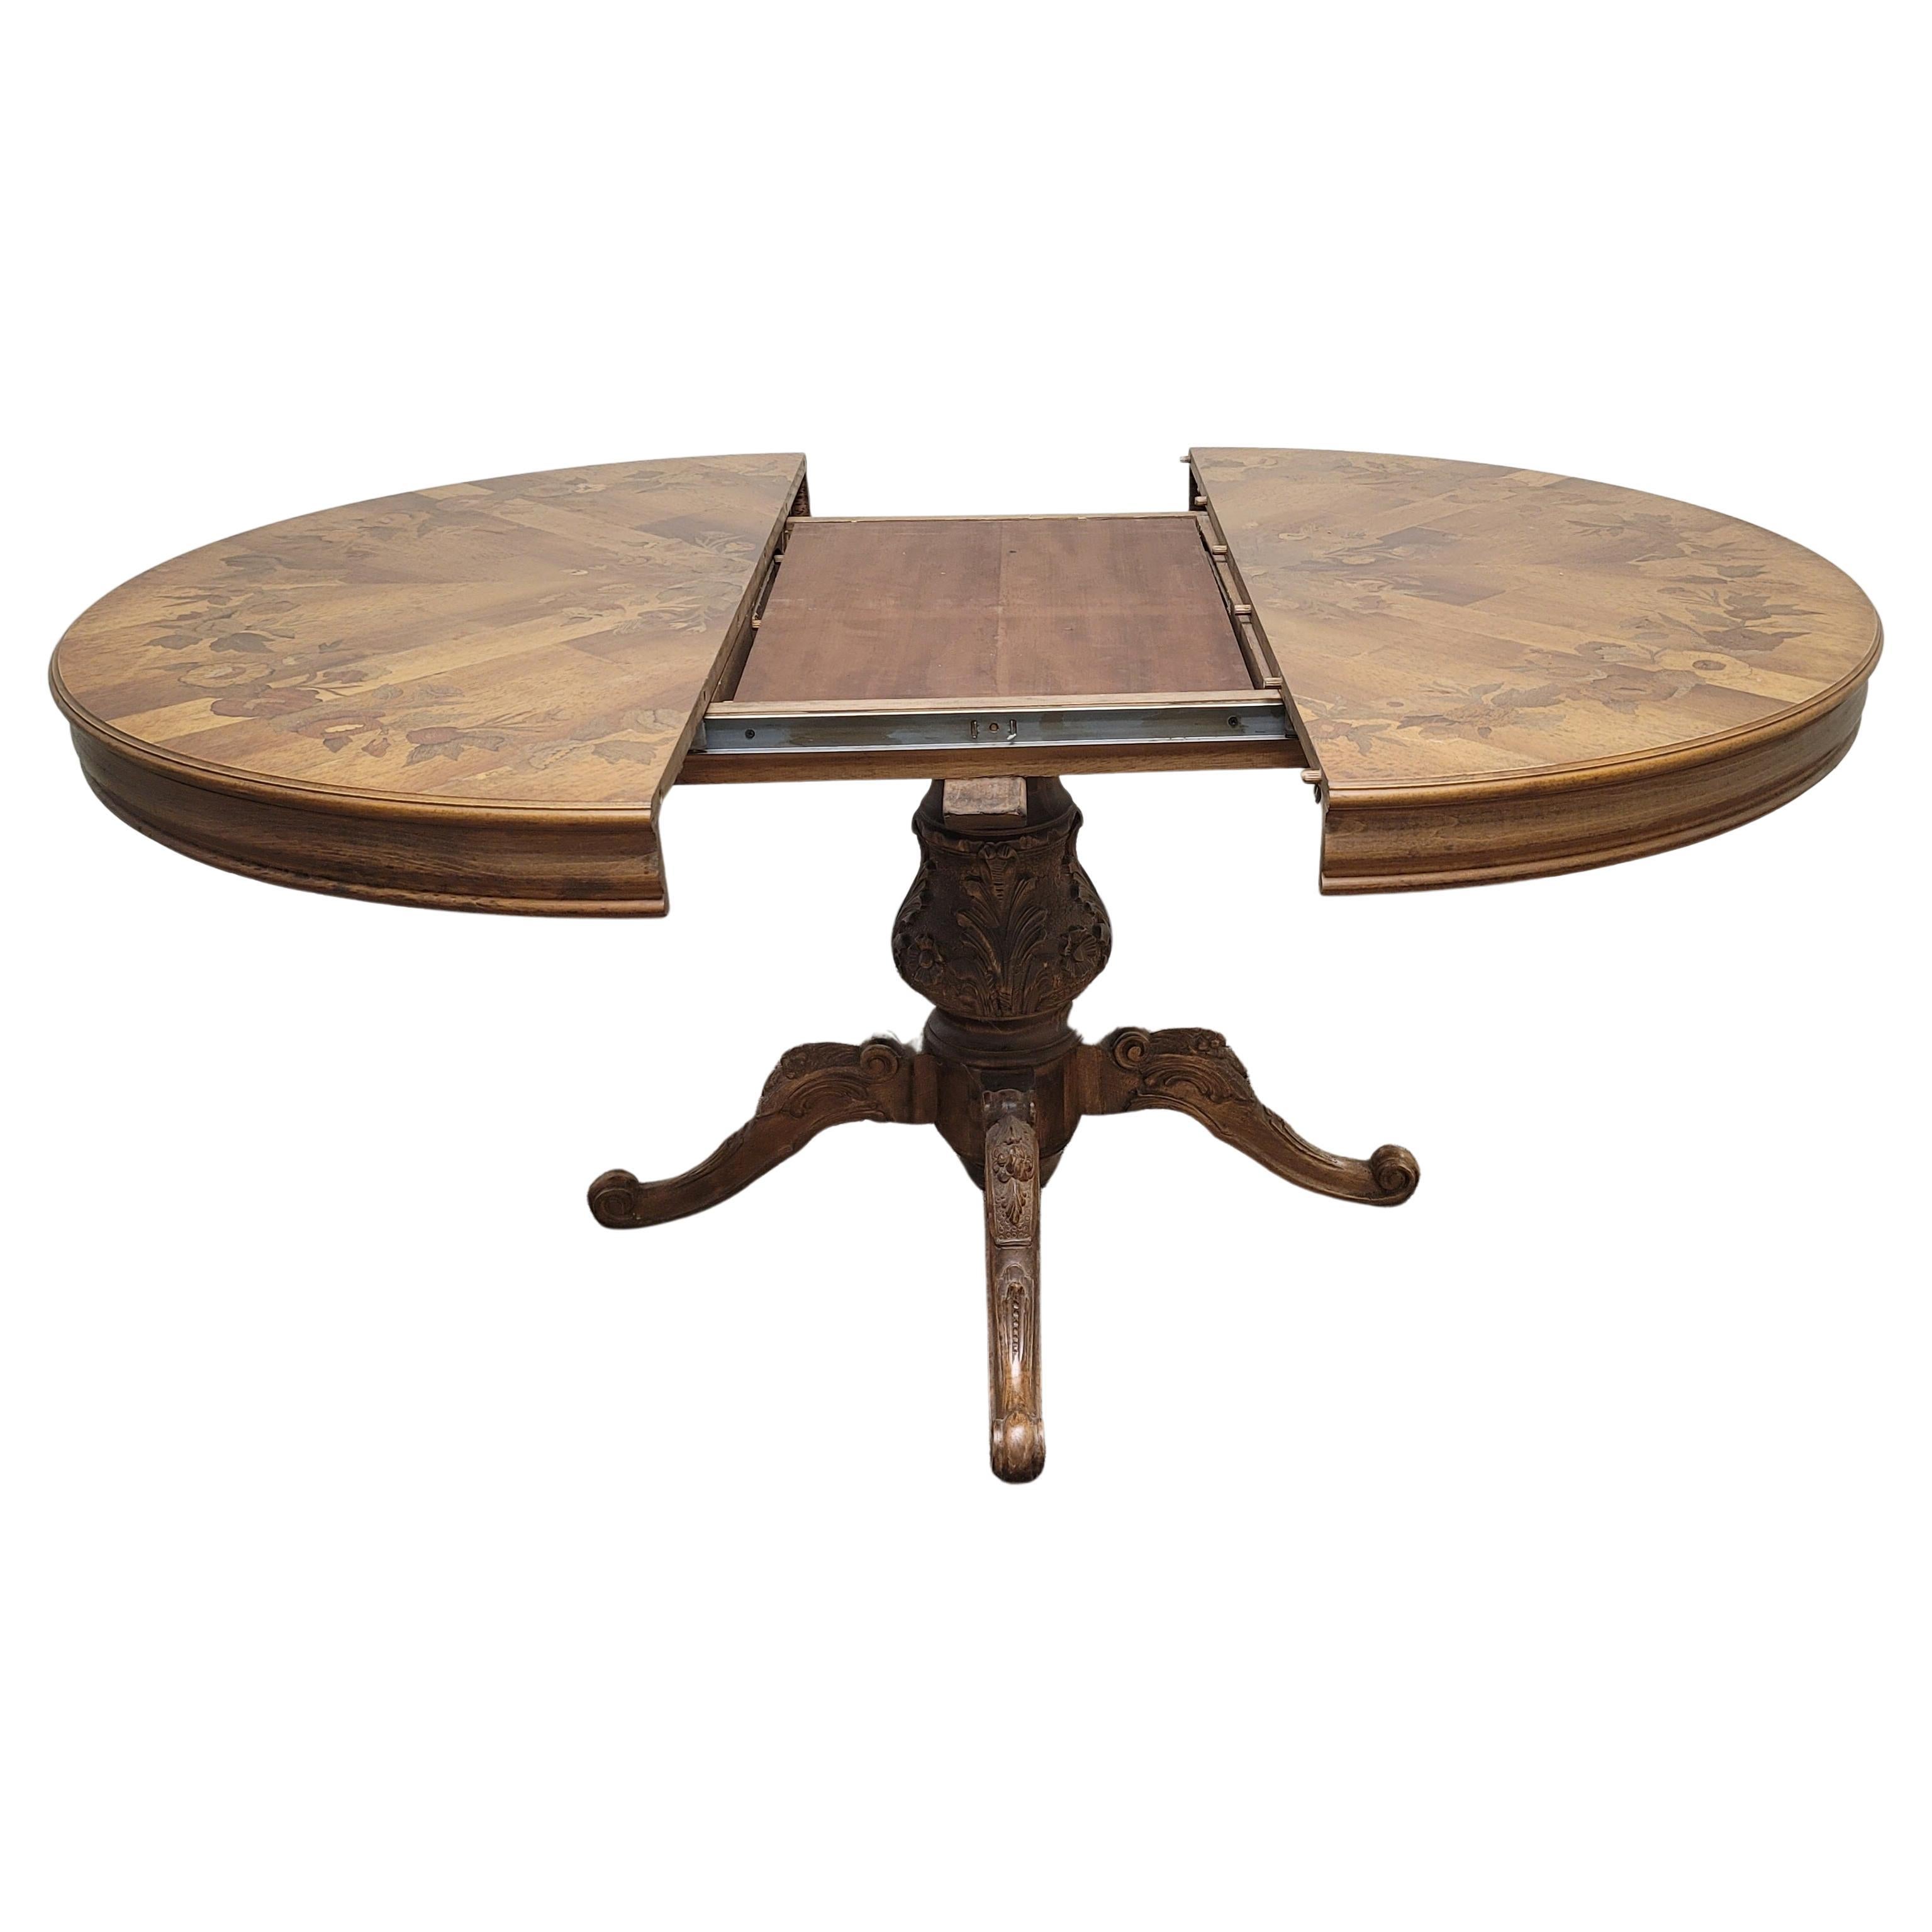 French Provincial Marquetry Inlaid Mixed Fruitwood Breakfast / Dining Table For Sale 3